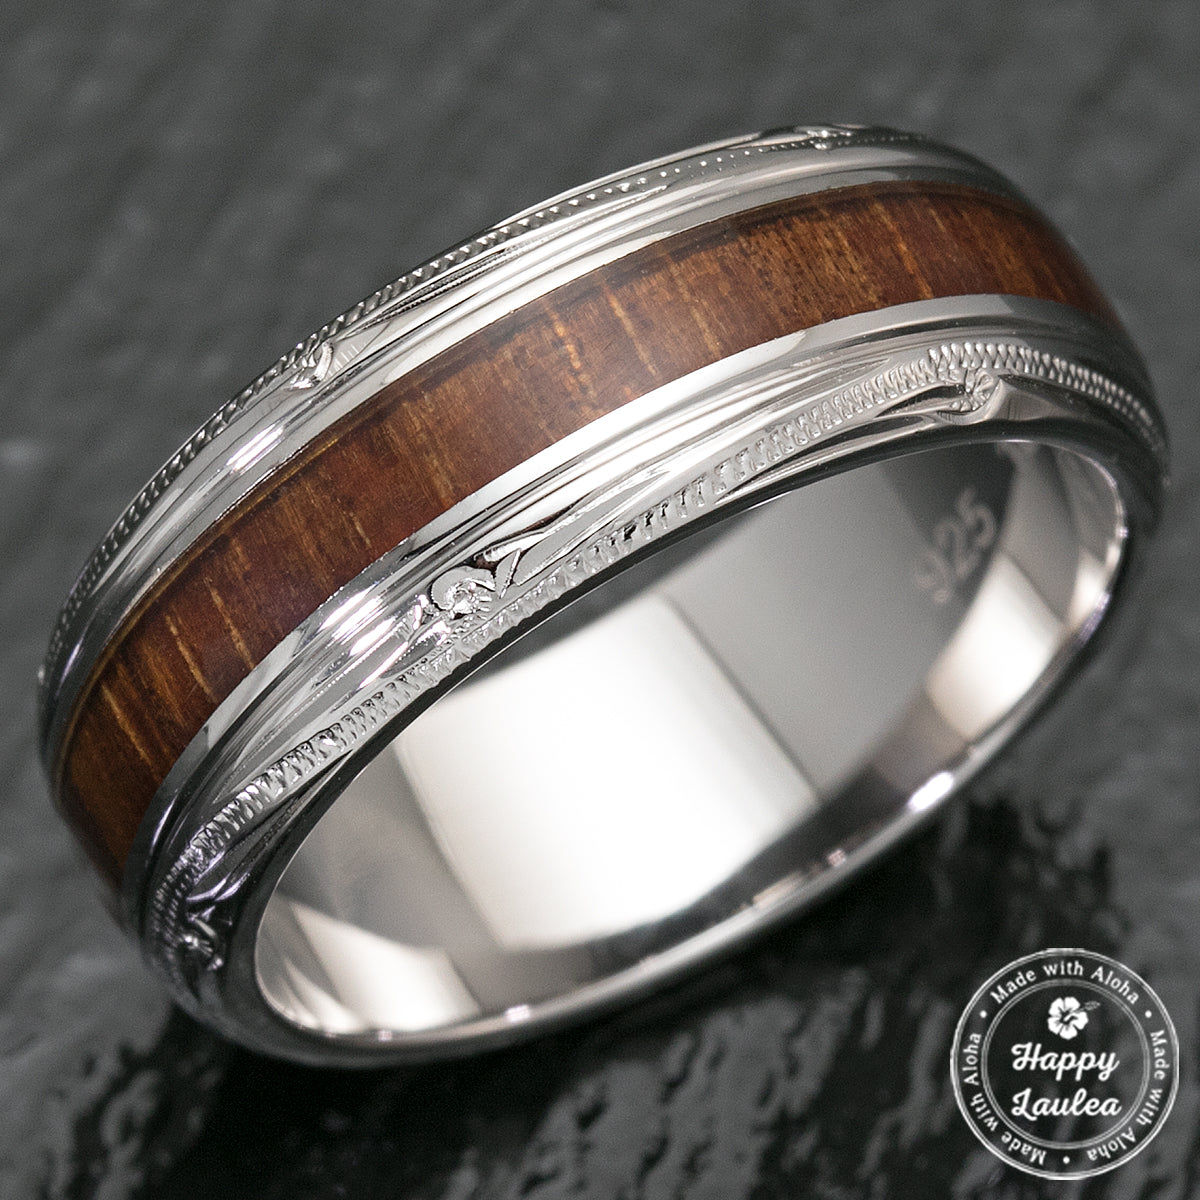 Sterling Silver Hawaiian Jewelry Ring with Koa Wood Inlay - 8mm, Dome Shape, Standard Fitment